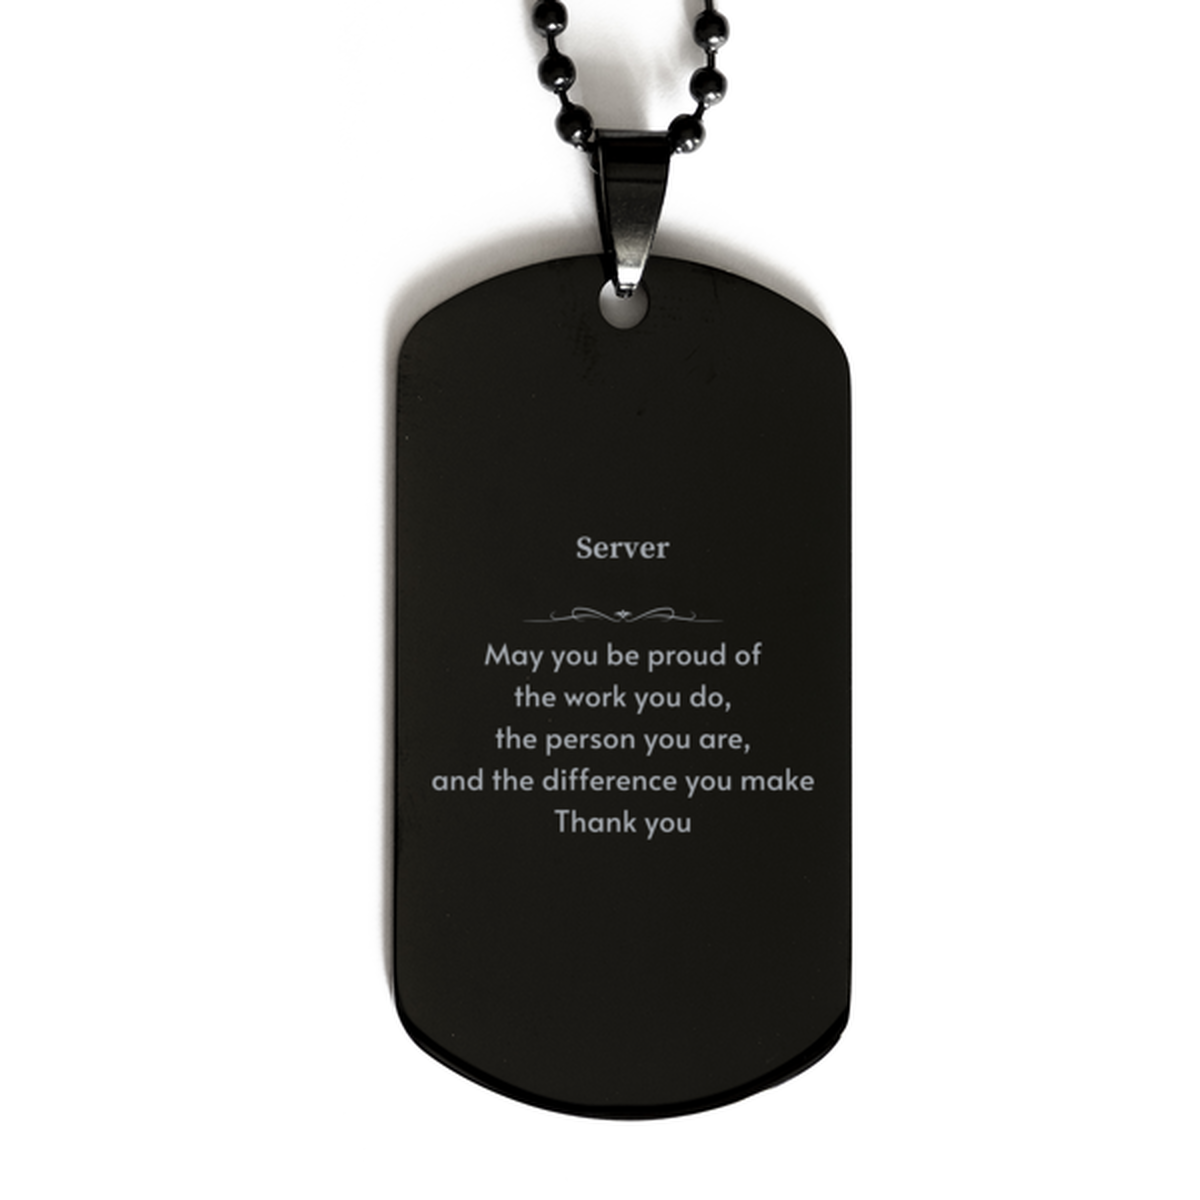 Heartwarming Black Dog Tag Retirement Coworkers Gifts for Server, Server May You be proud of the work you do, the person you are Gifts for Boss Men Women Friends